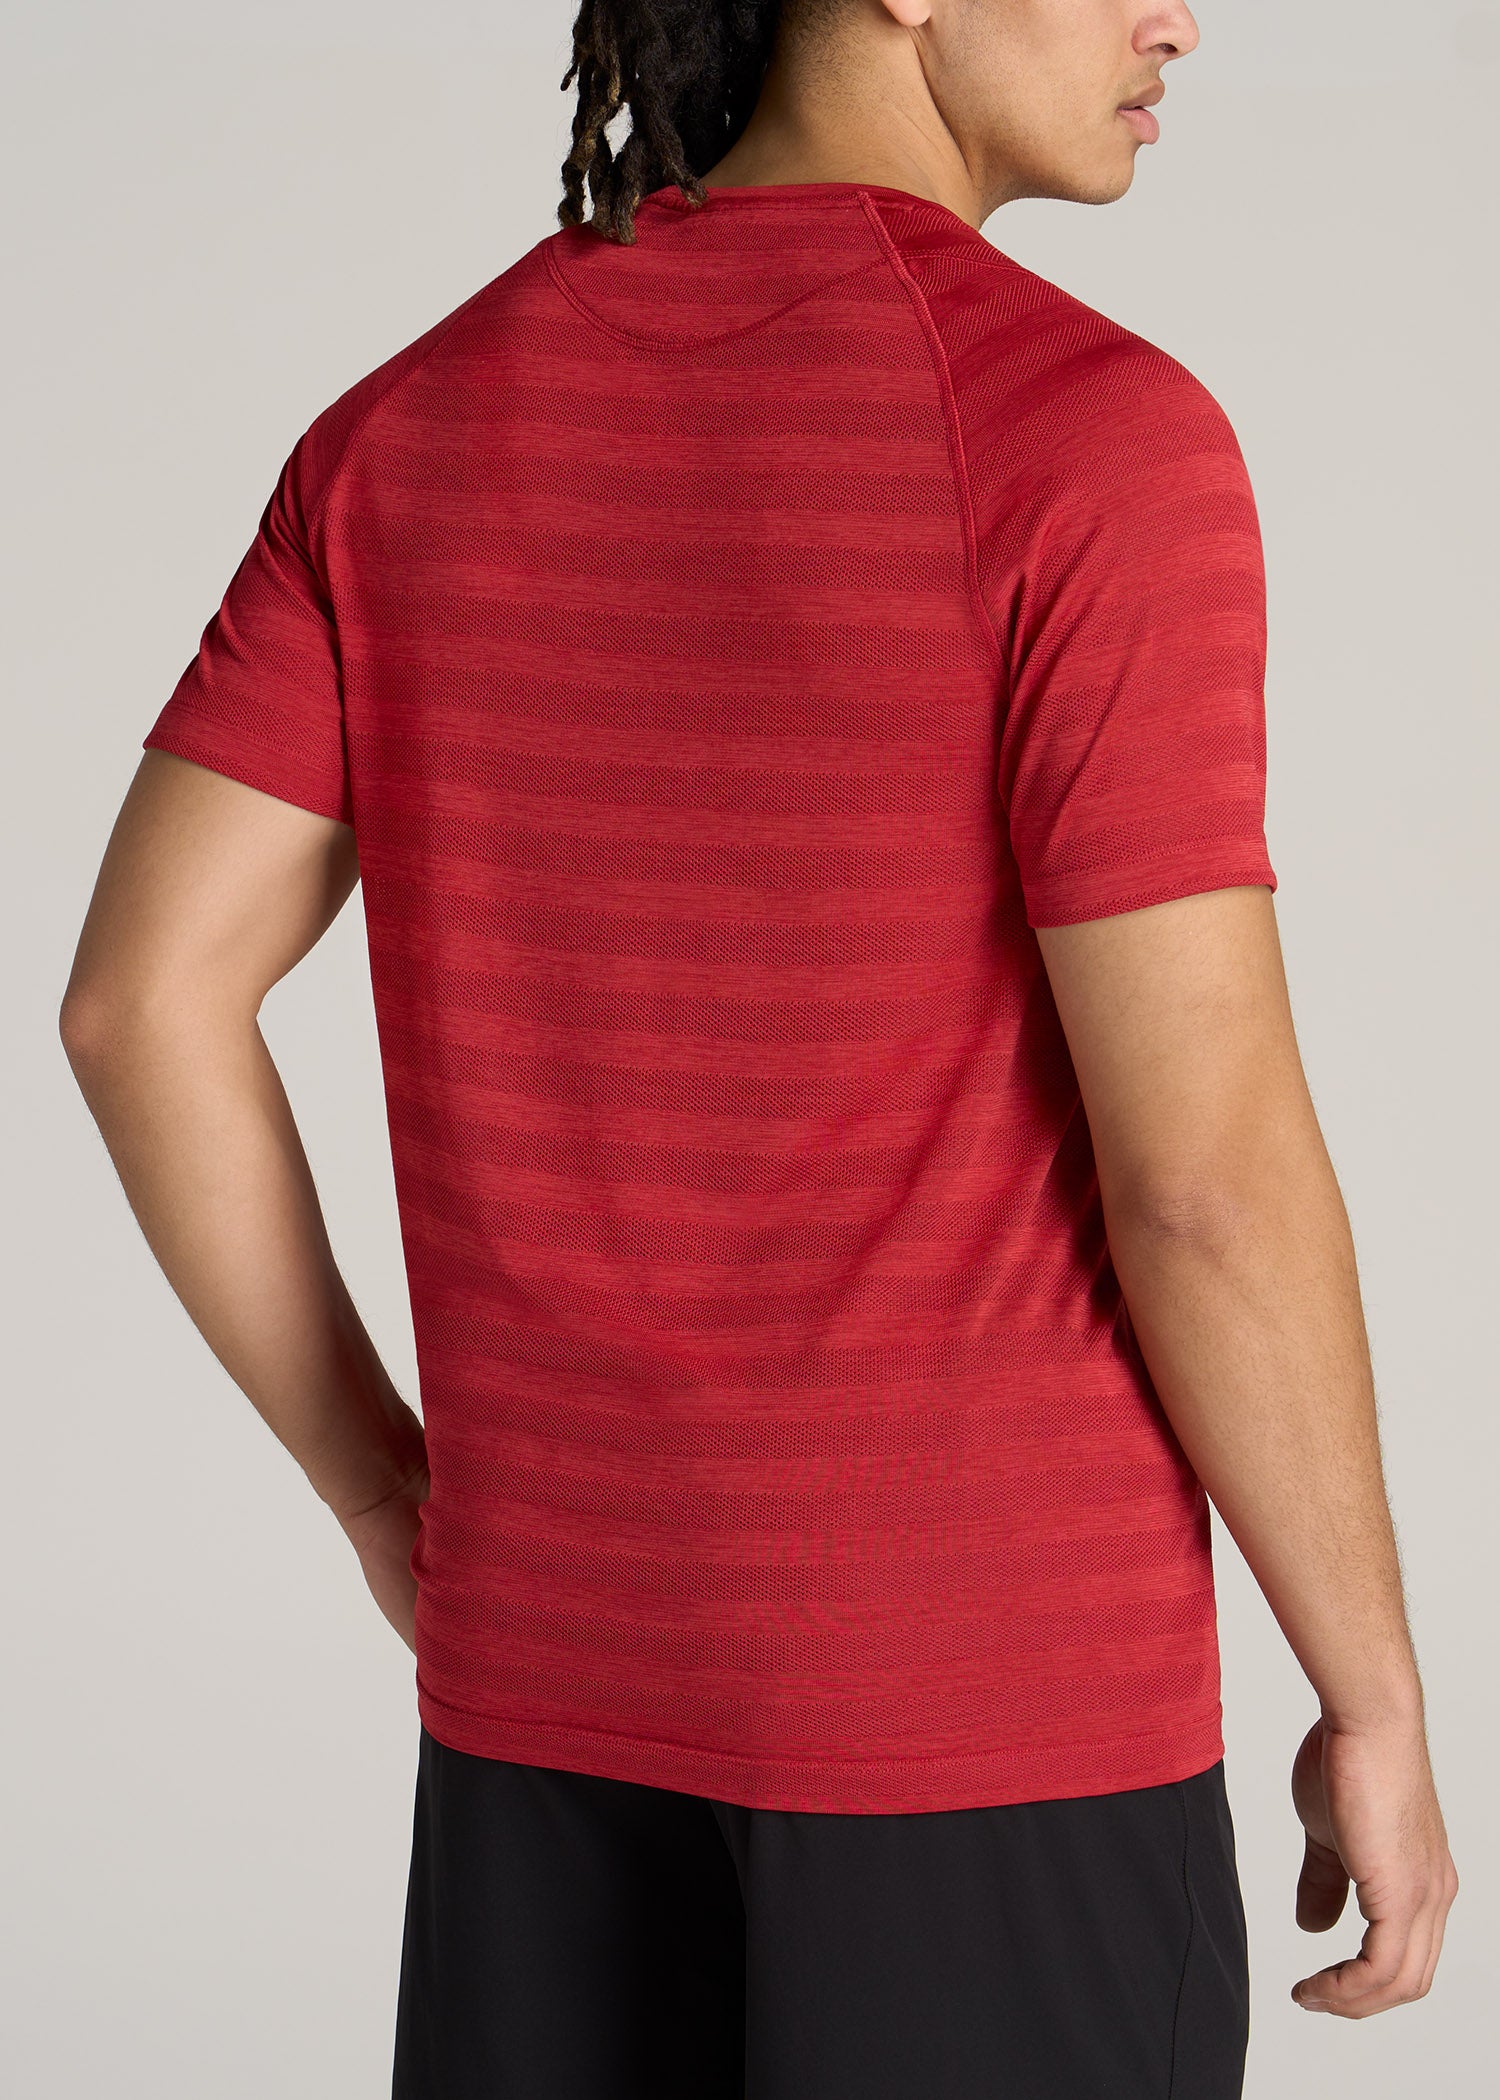 A.T. Performance Modern-Fit Crewneck Raglan Short Sleeve T-Shirt for Tall Men in Red Heather XL / Tall / Red Heather